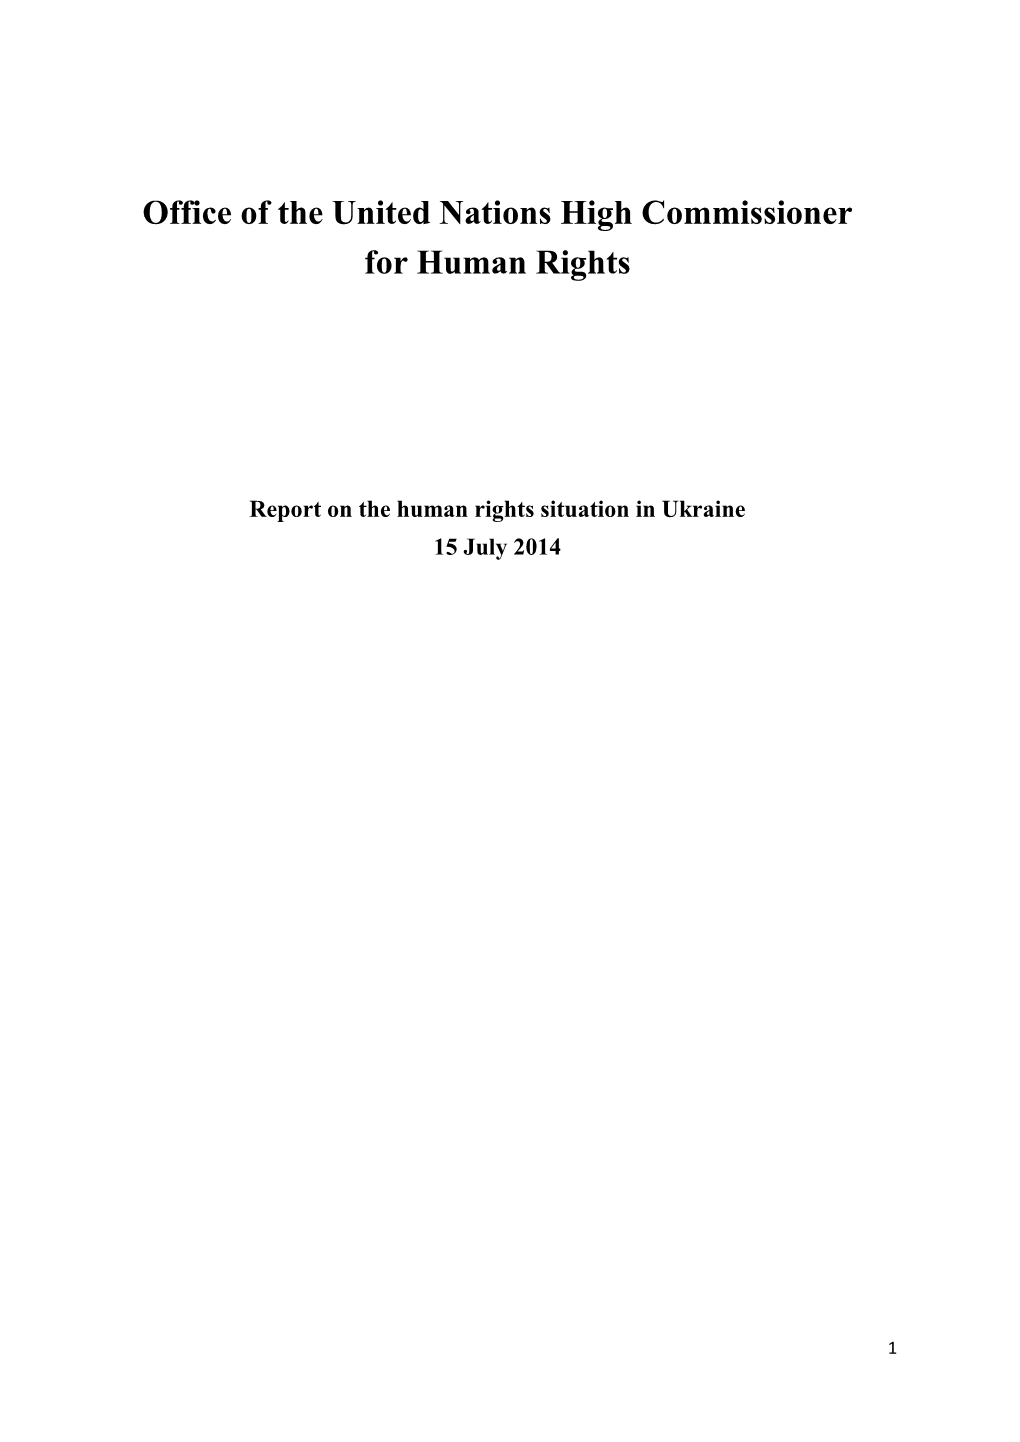 Report on the Human Rights Situation in Ukraine 15 July 2014